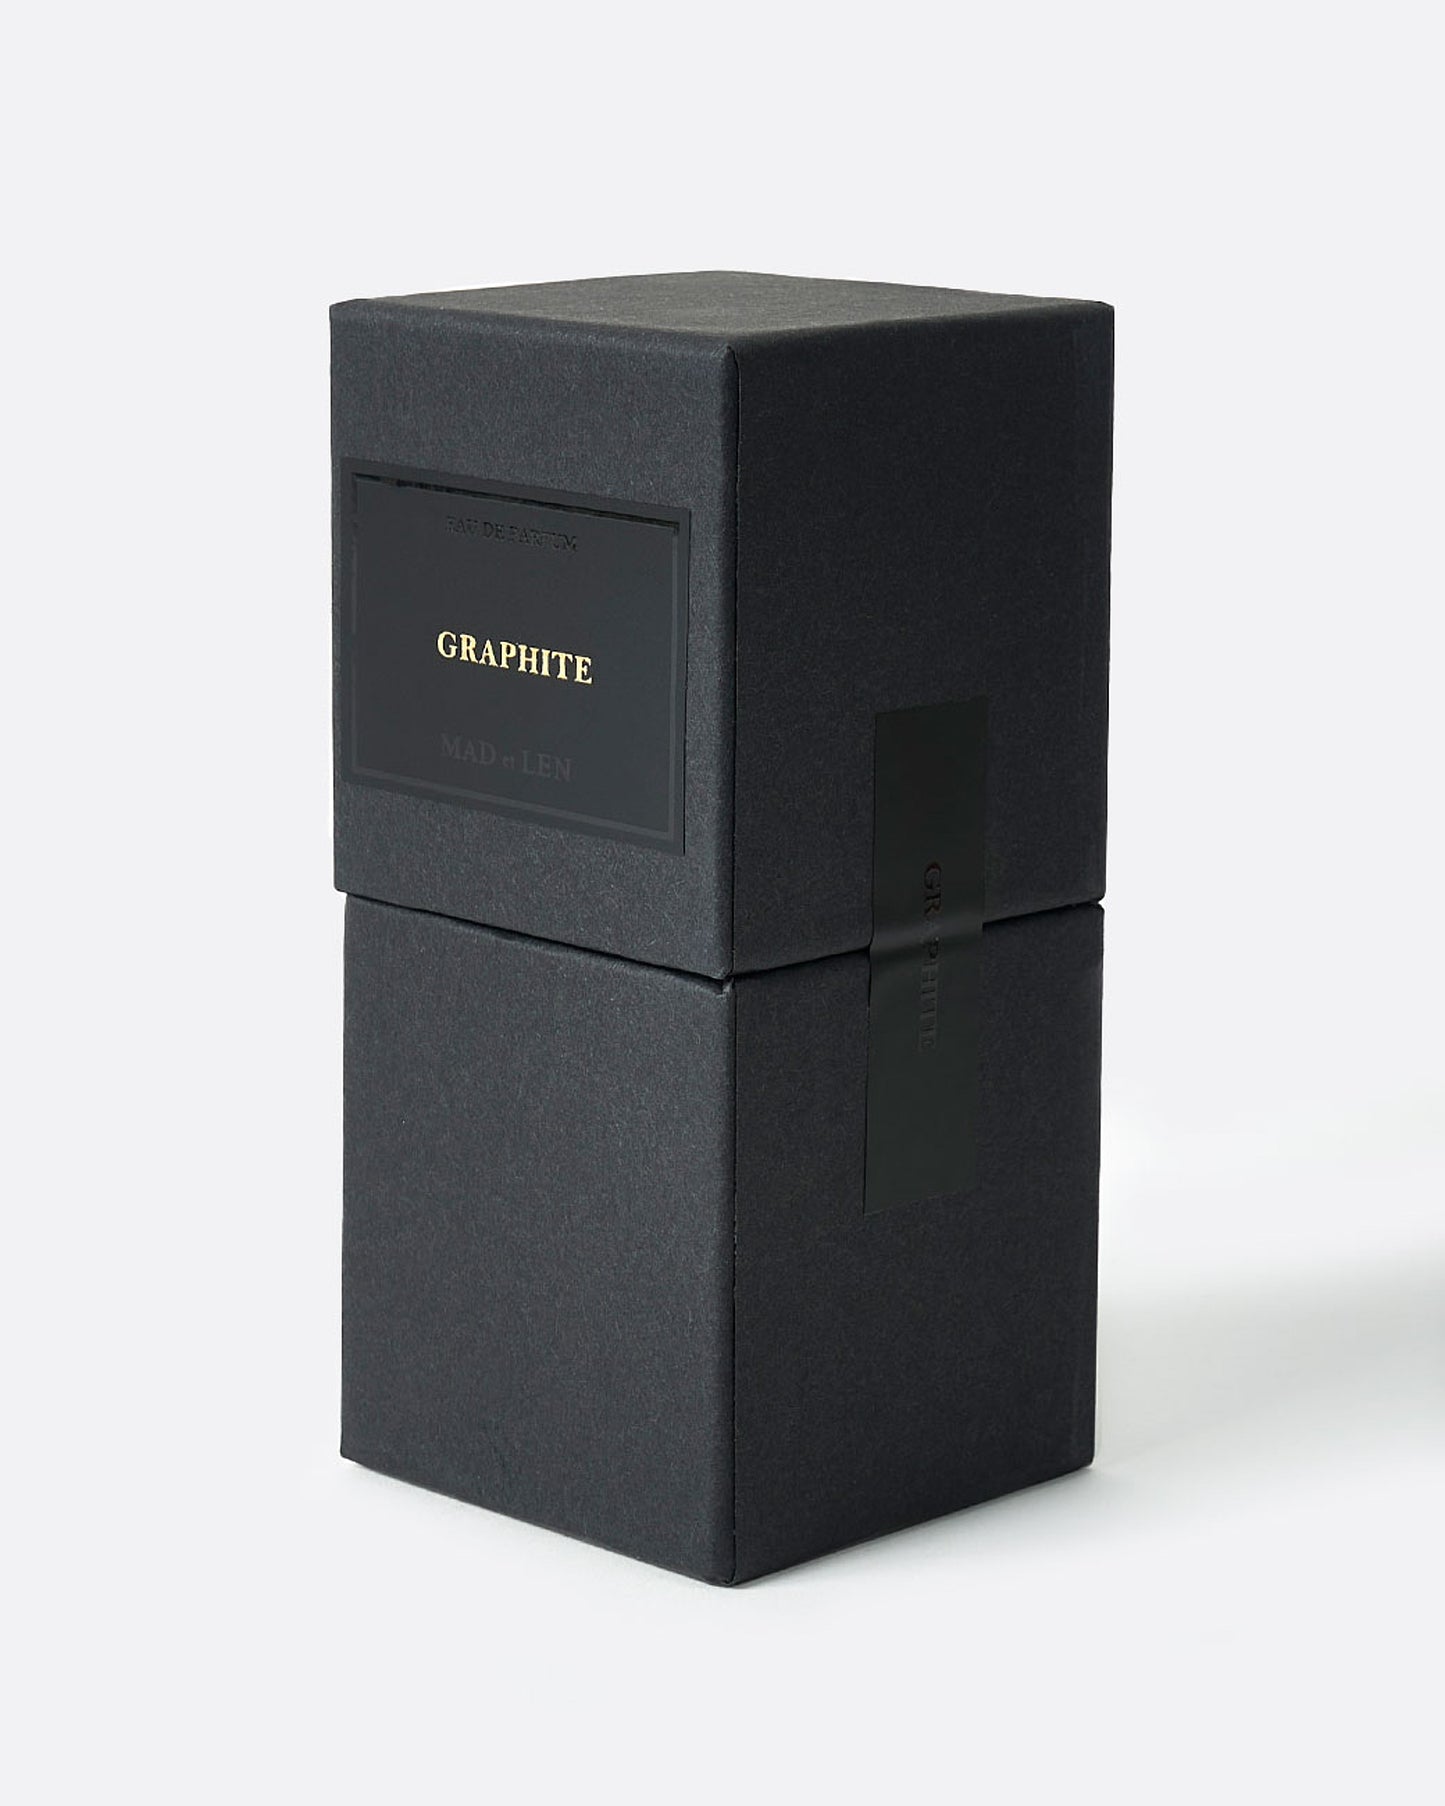 A bottle of Mad et Len's Graphite perfume in its box packaging.